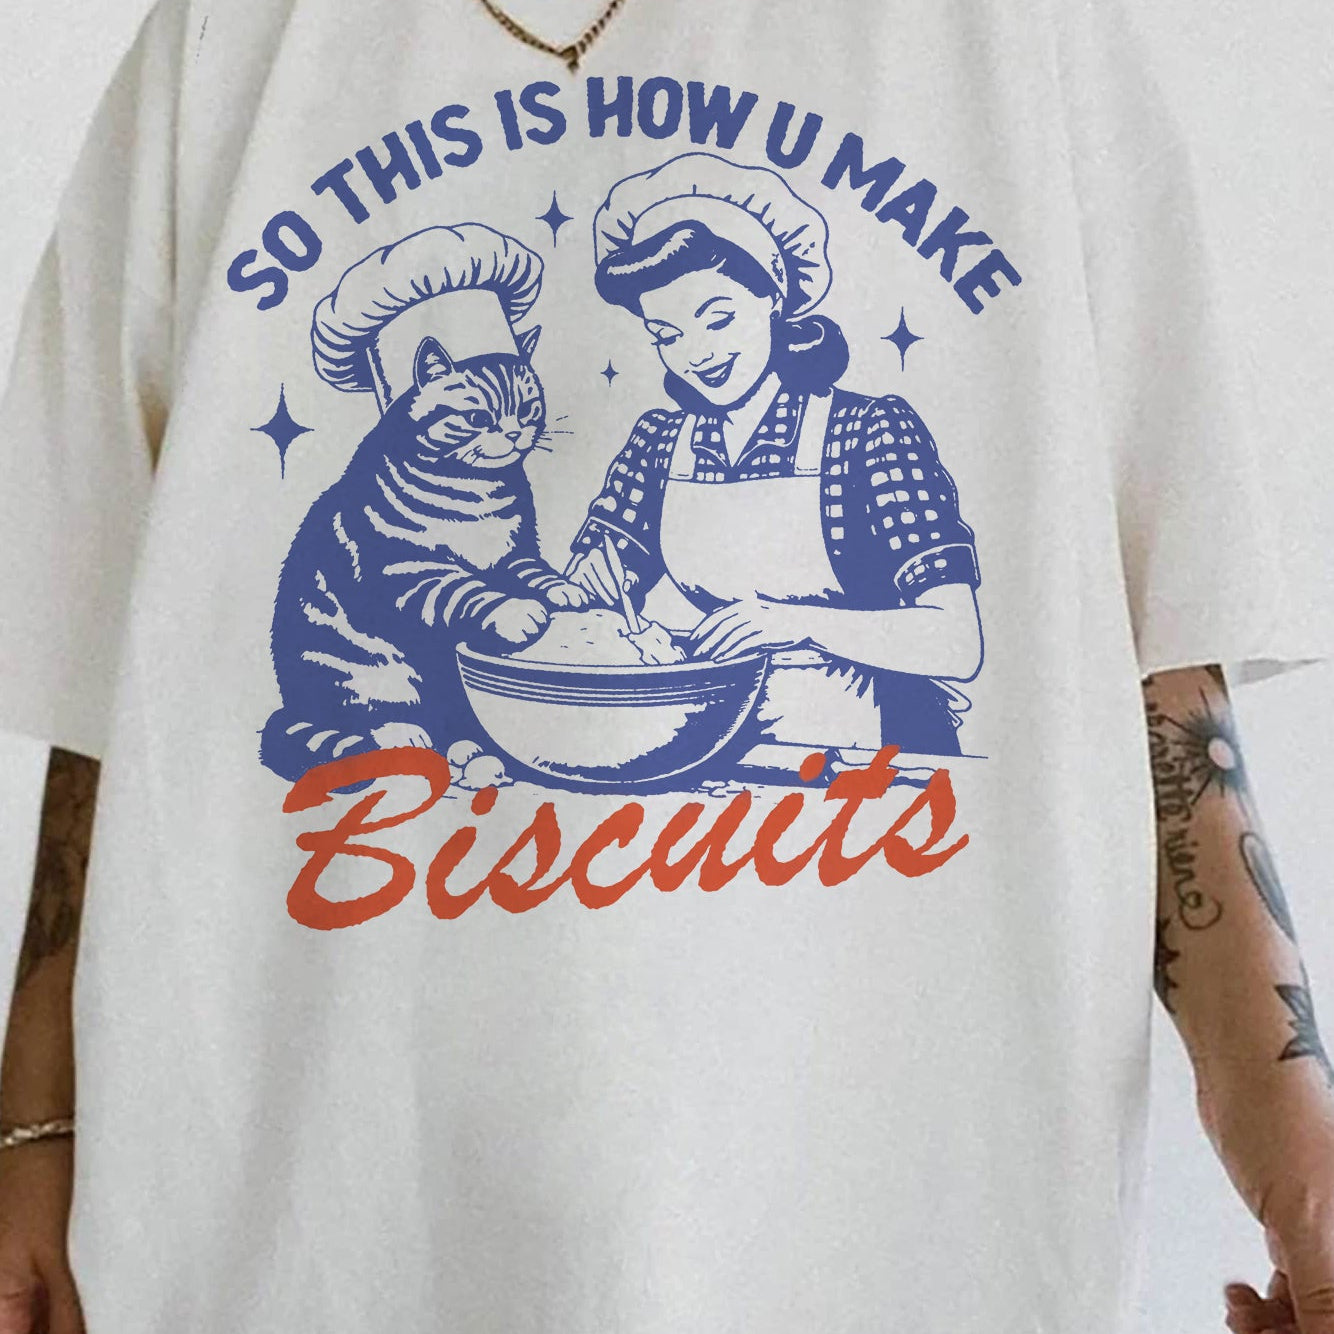 So This Is How You Make Biscuits Tee For Women